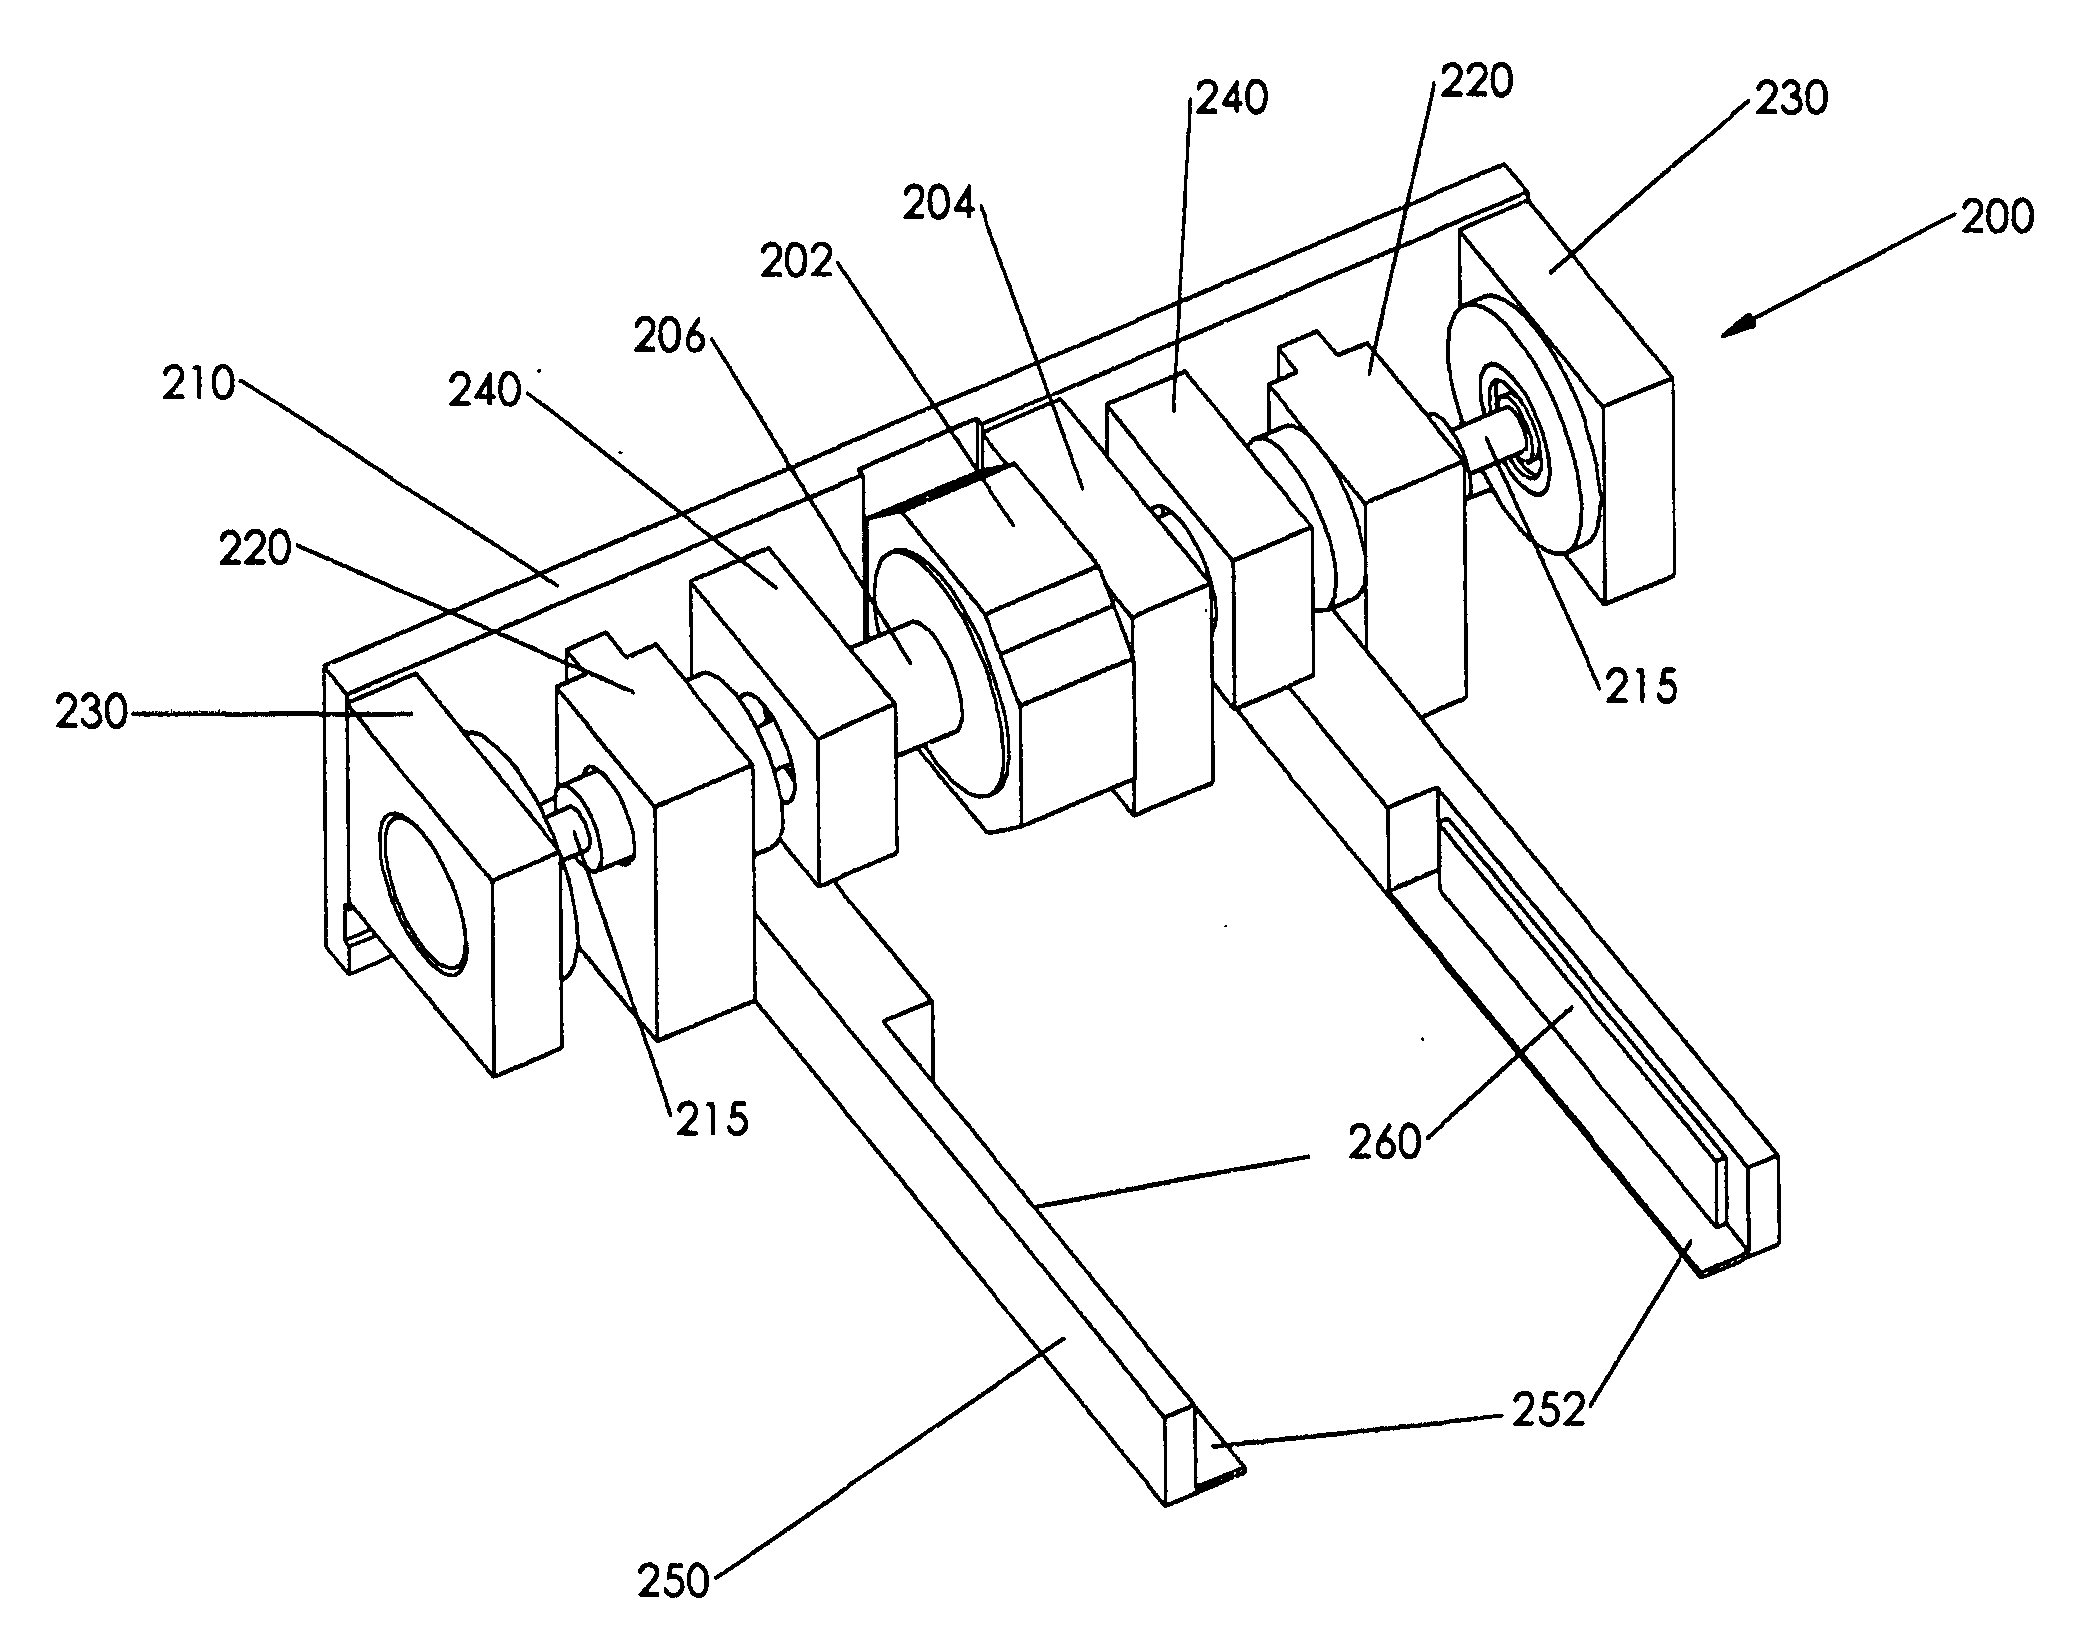 Parallel gripper for handling multiwell plate.